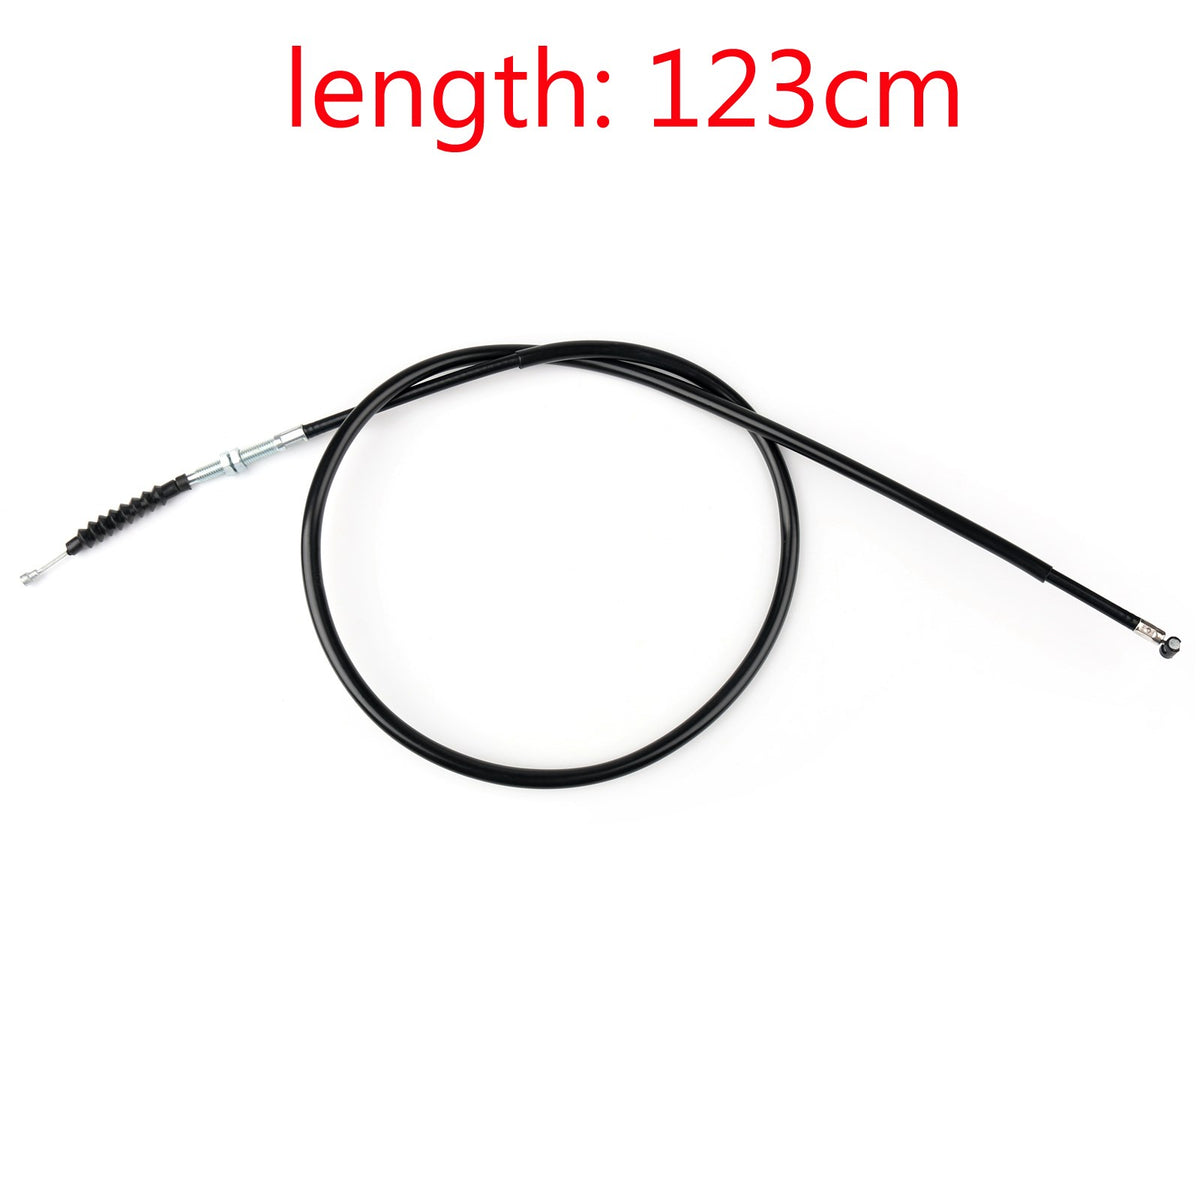 Wire Steel Clutch Cable Replacement For Yamaha YZF R1 2004-2014 2008 2012